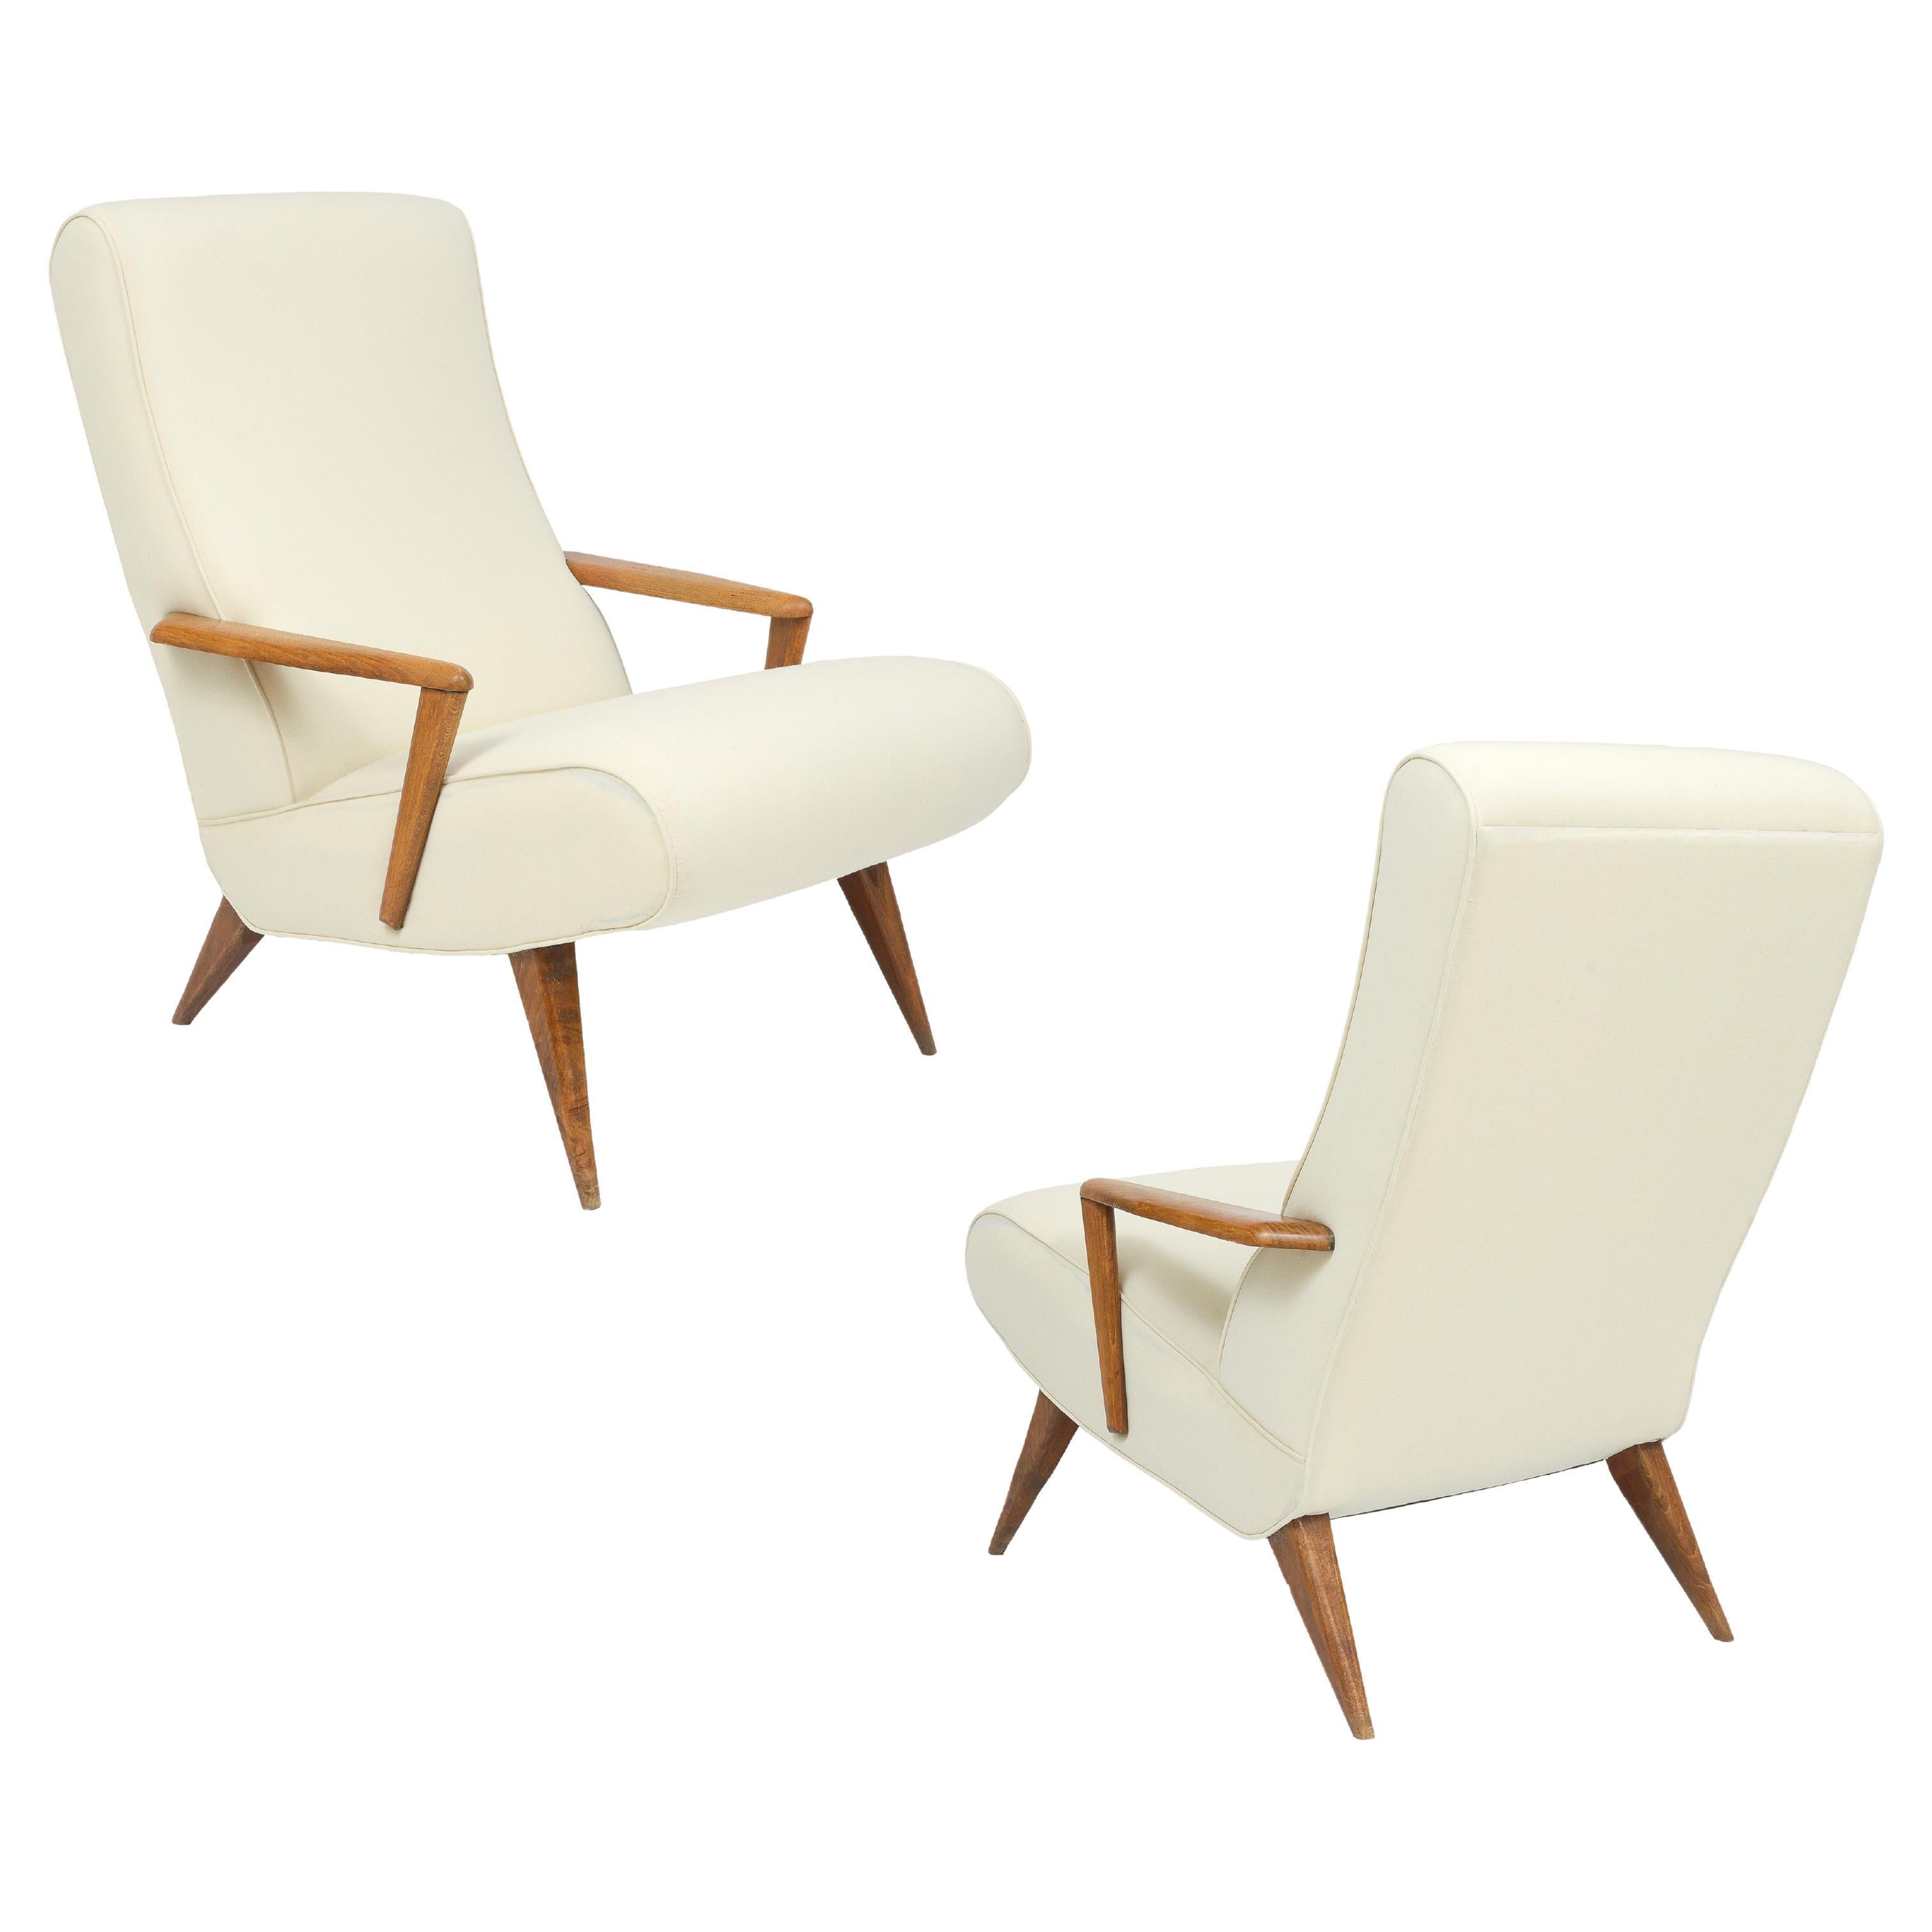 Sculptural Pair Italian White Wood Elegant Lounge Chairs, 1960's, Italy